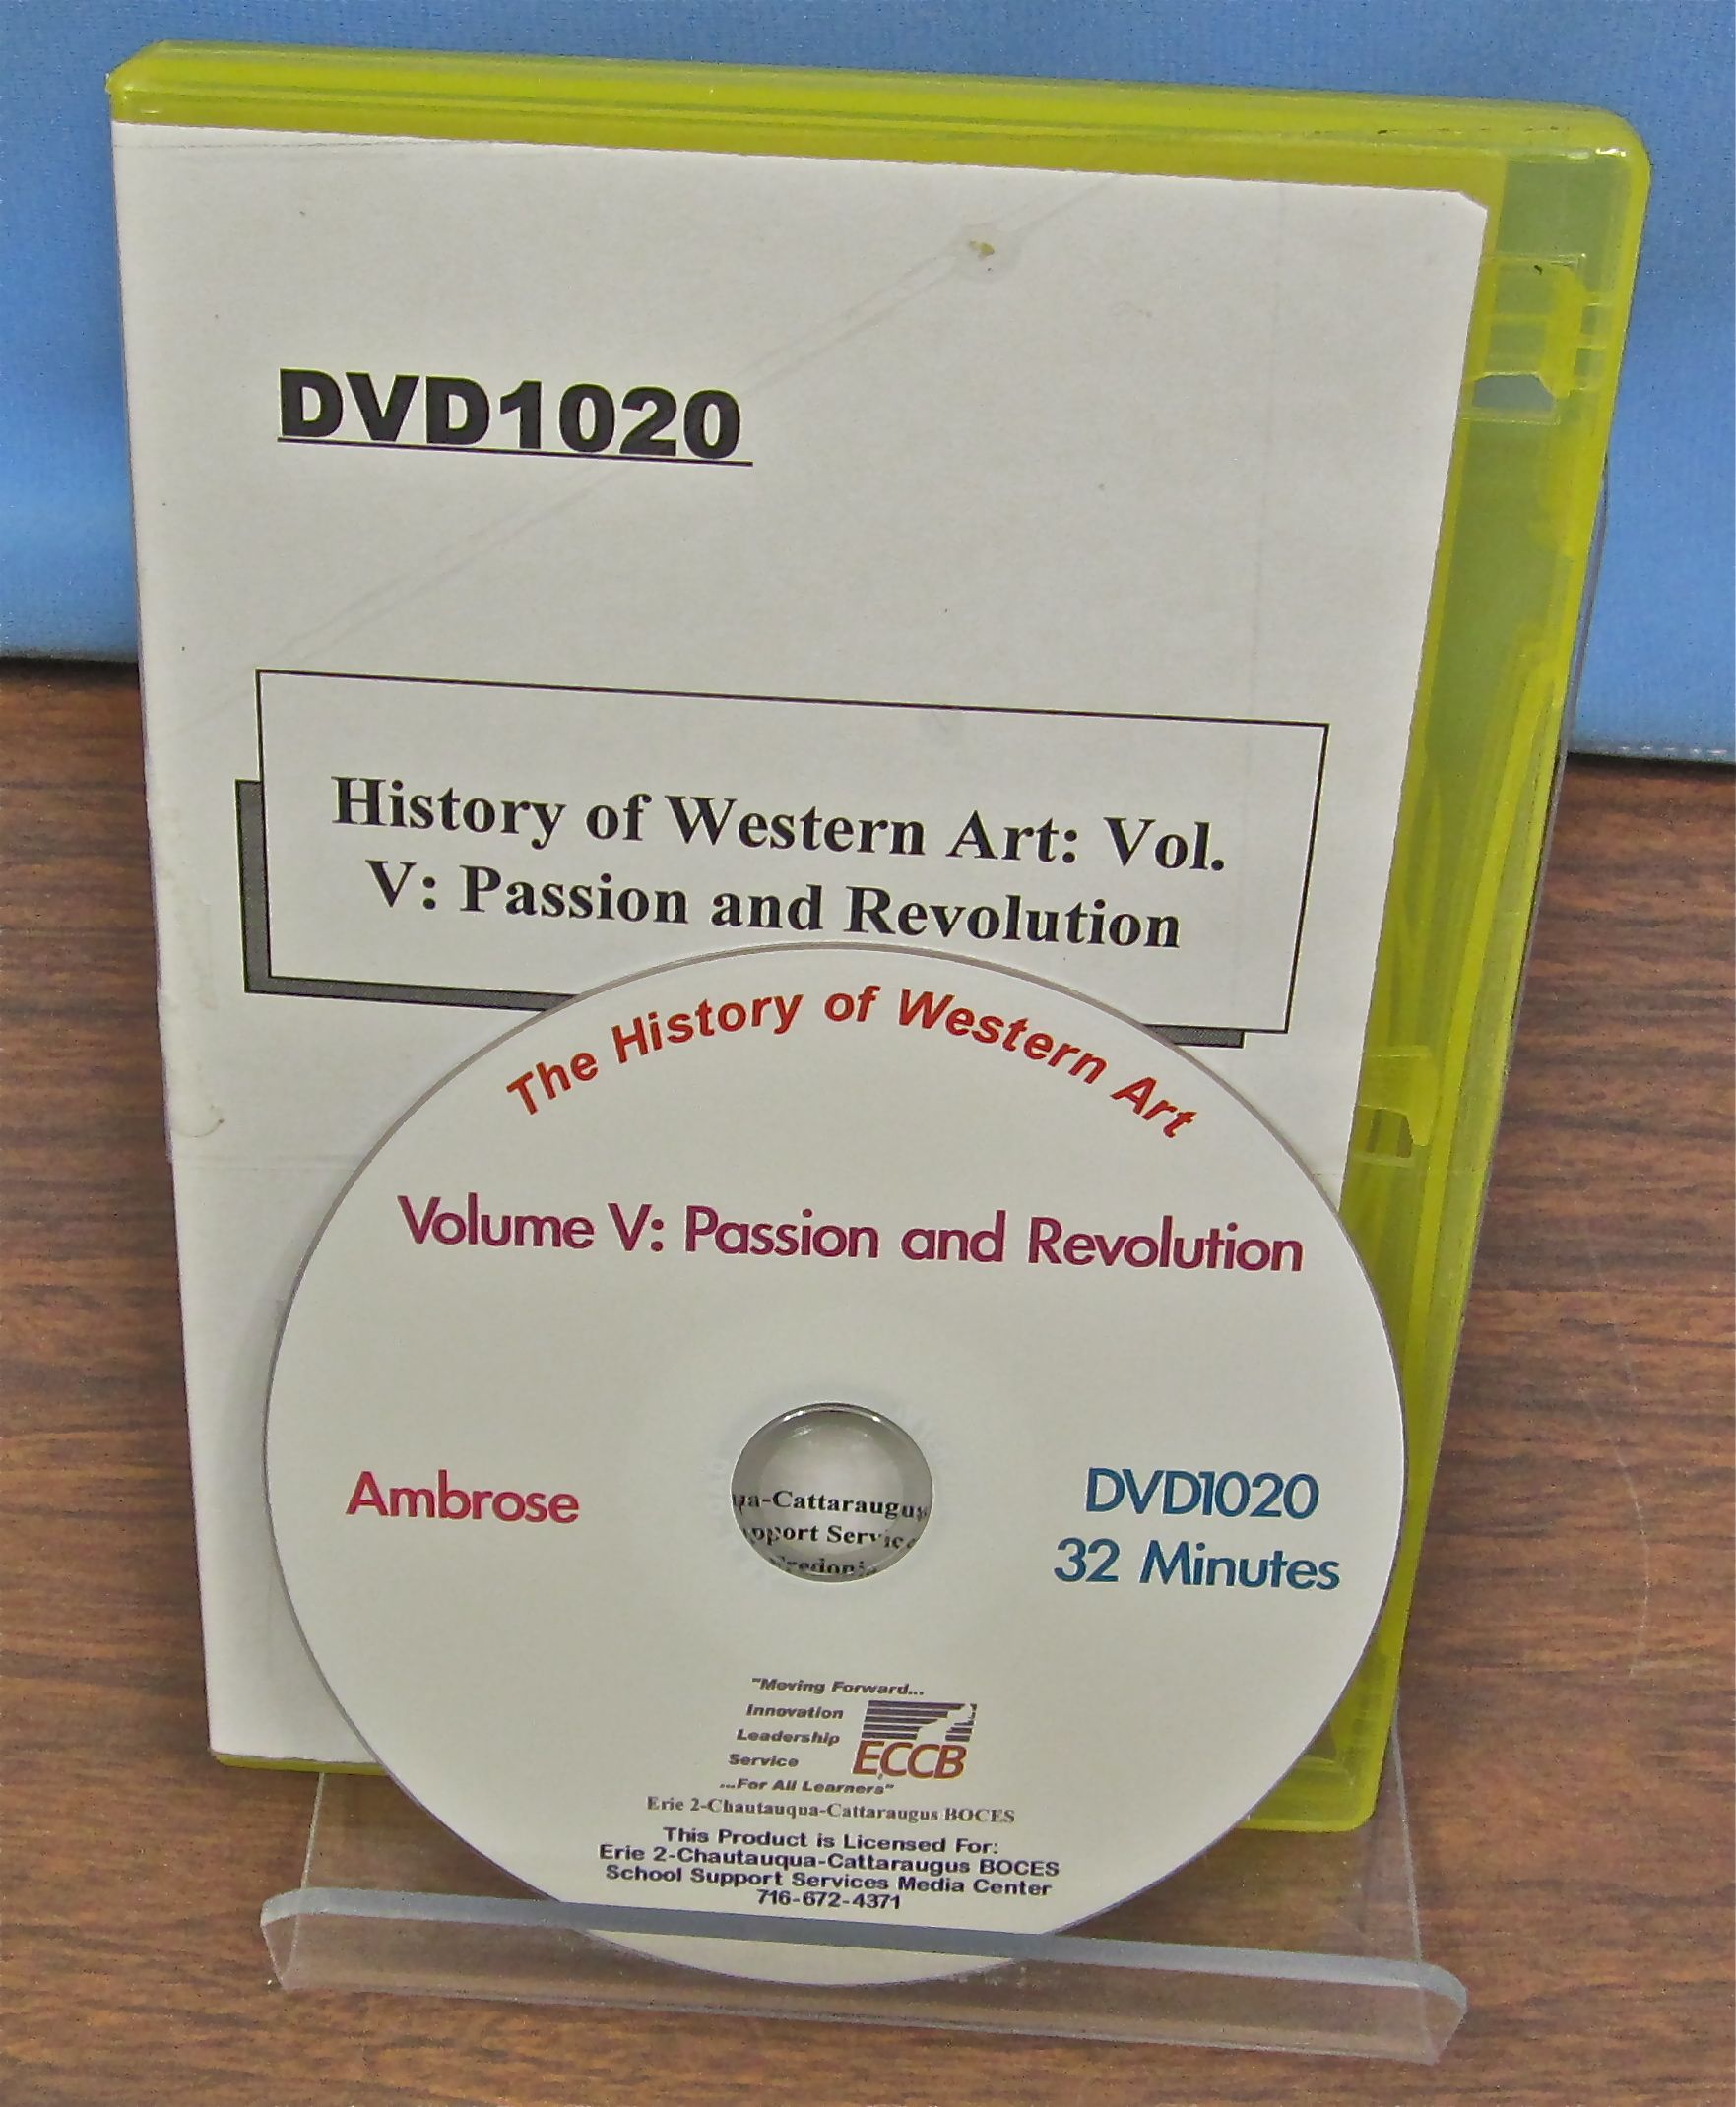 History of Western Art: Vol. V: Passion and Revolution